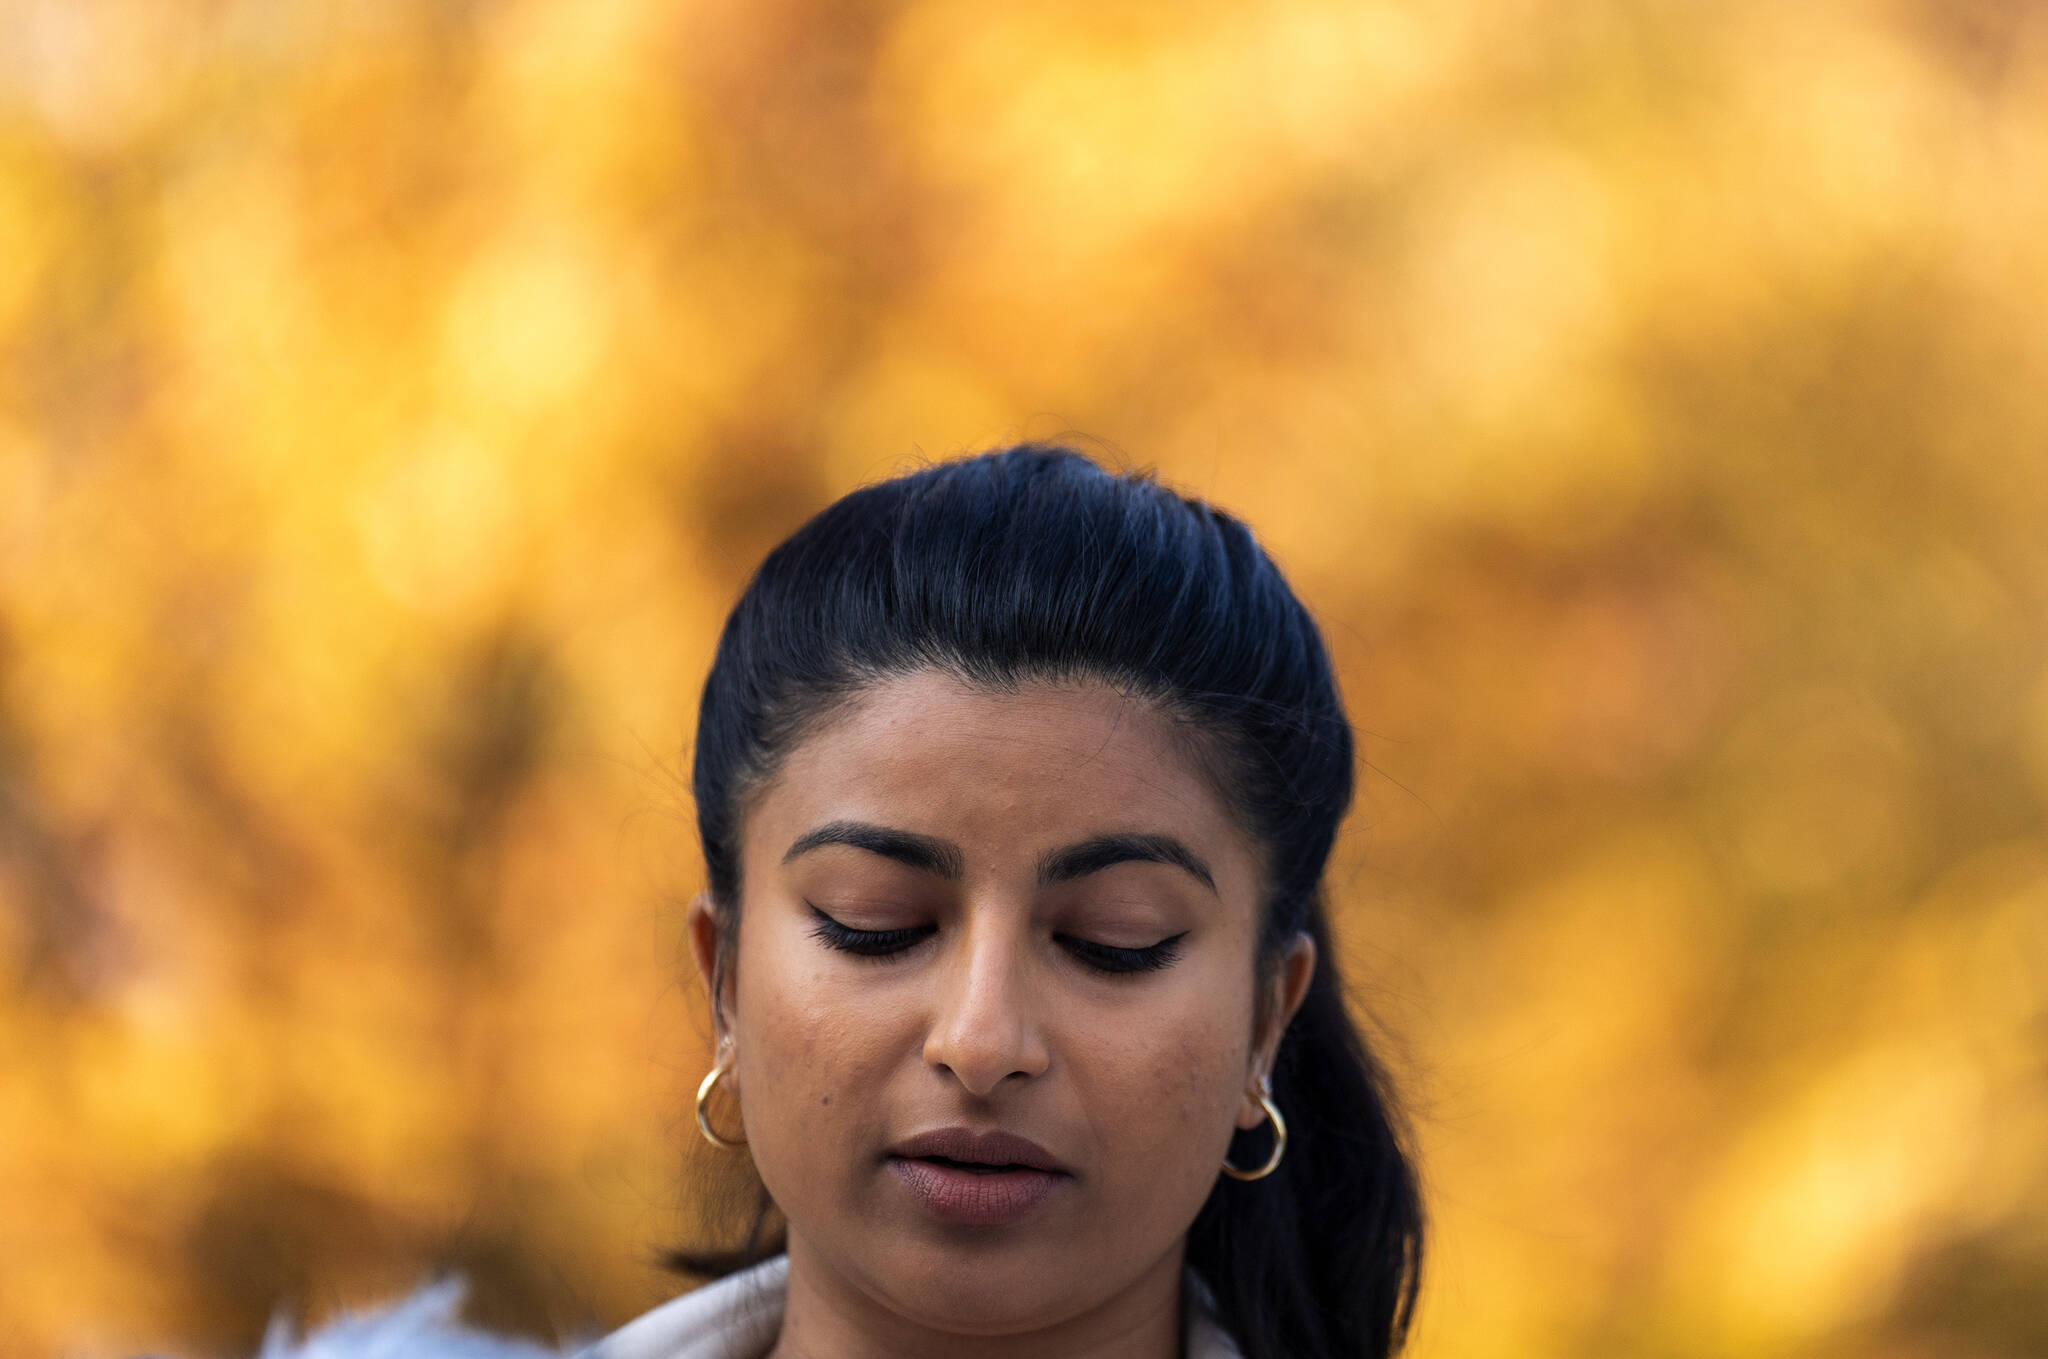 B.C. NDP leadership candidate Anjali Appadurai pauses for a moment as she addresses the media during a news conference in downtown Vancouver, Wednesday, October 19, 2022. THE CANADIAN PRESS/Jonathan Hayward